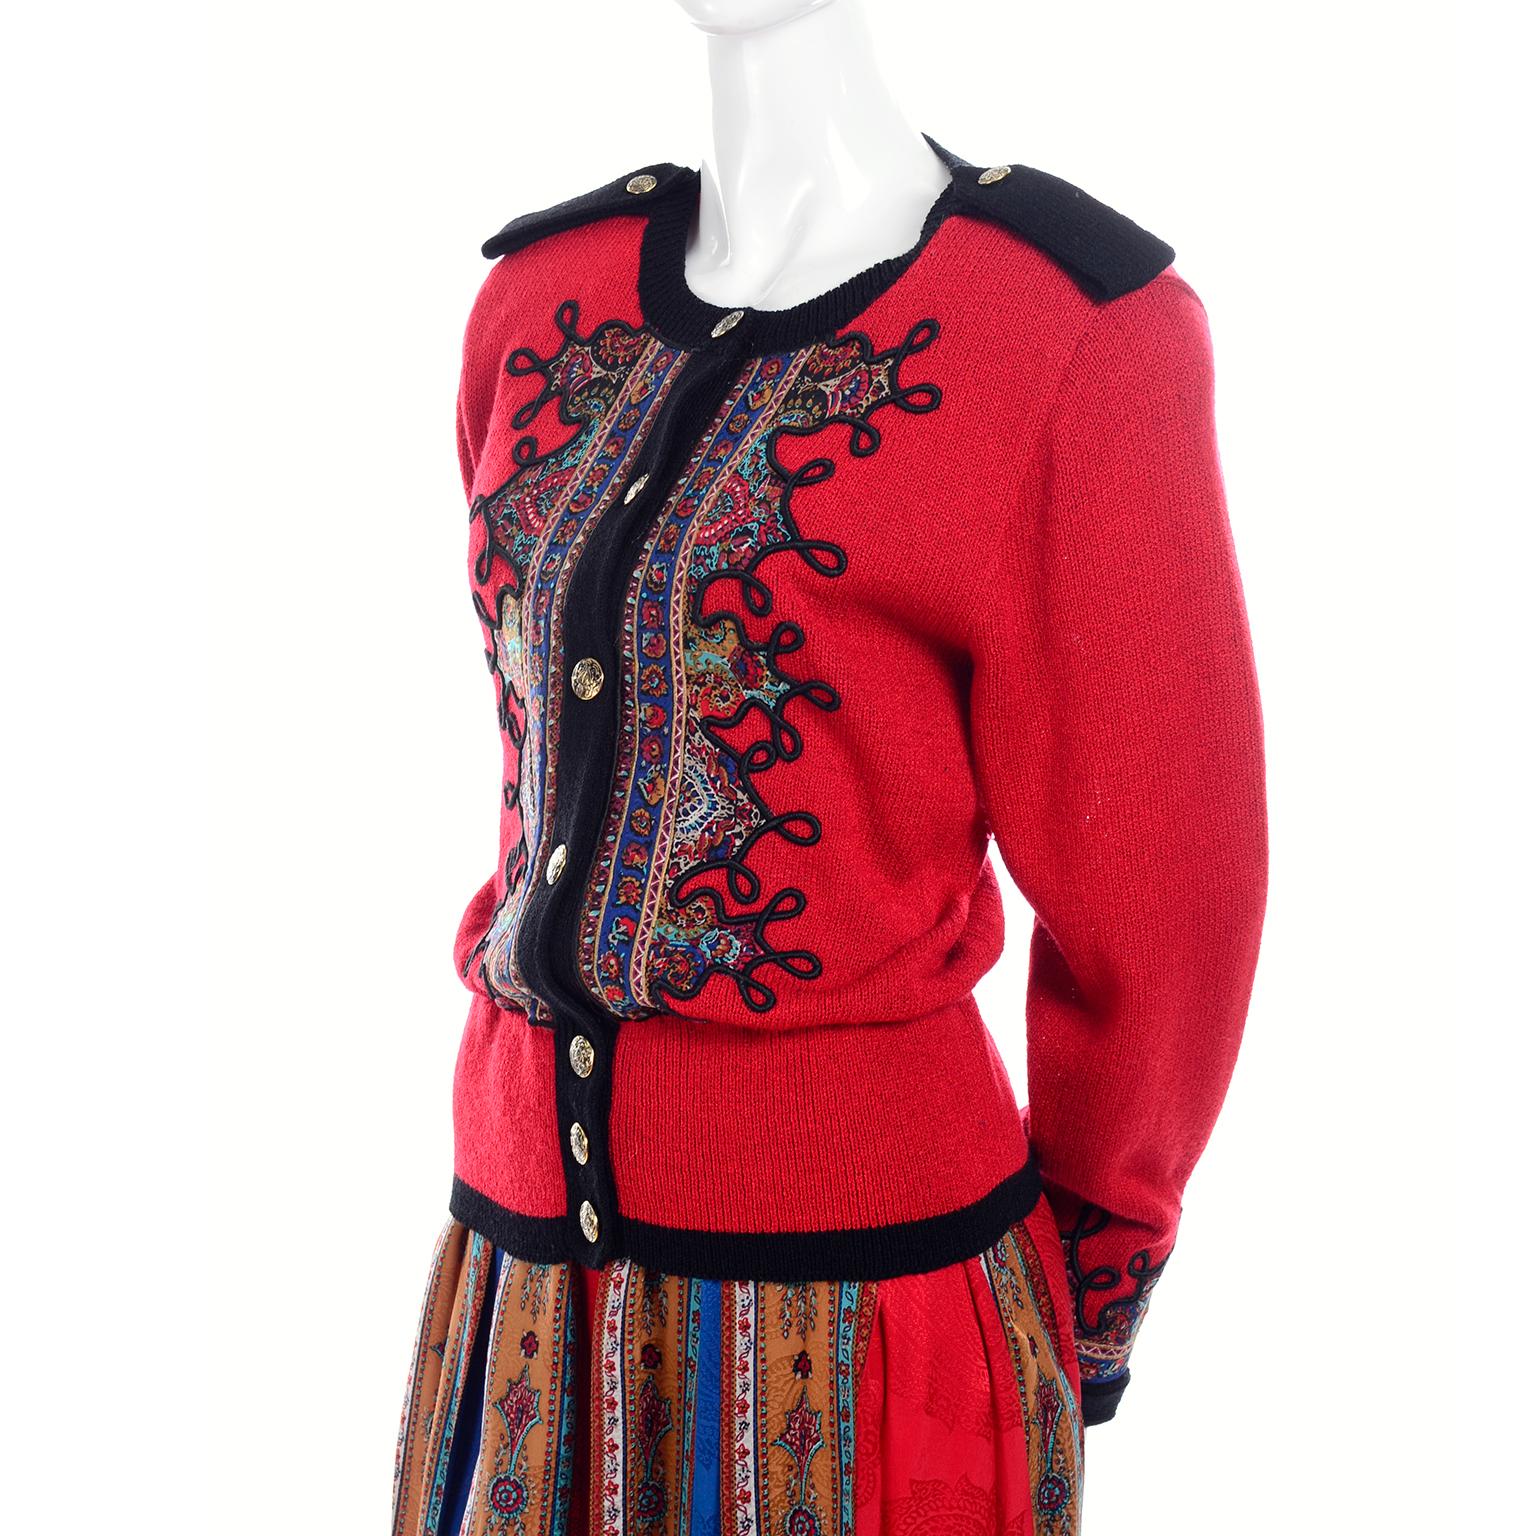 We love this 2 piece skirt and top vintage ensemble from Anne Crimmins.  This Uni Collection skirt and Sweater is so current looking with its pattern mixing style.  The top is red with patterned detailing around the front buttons.  The silk skirt